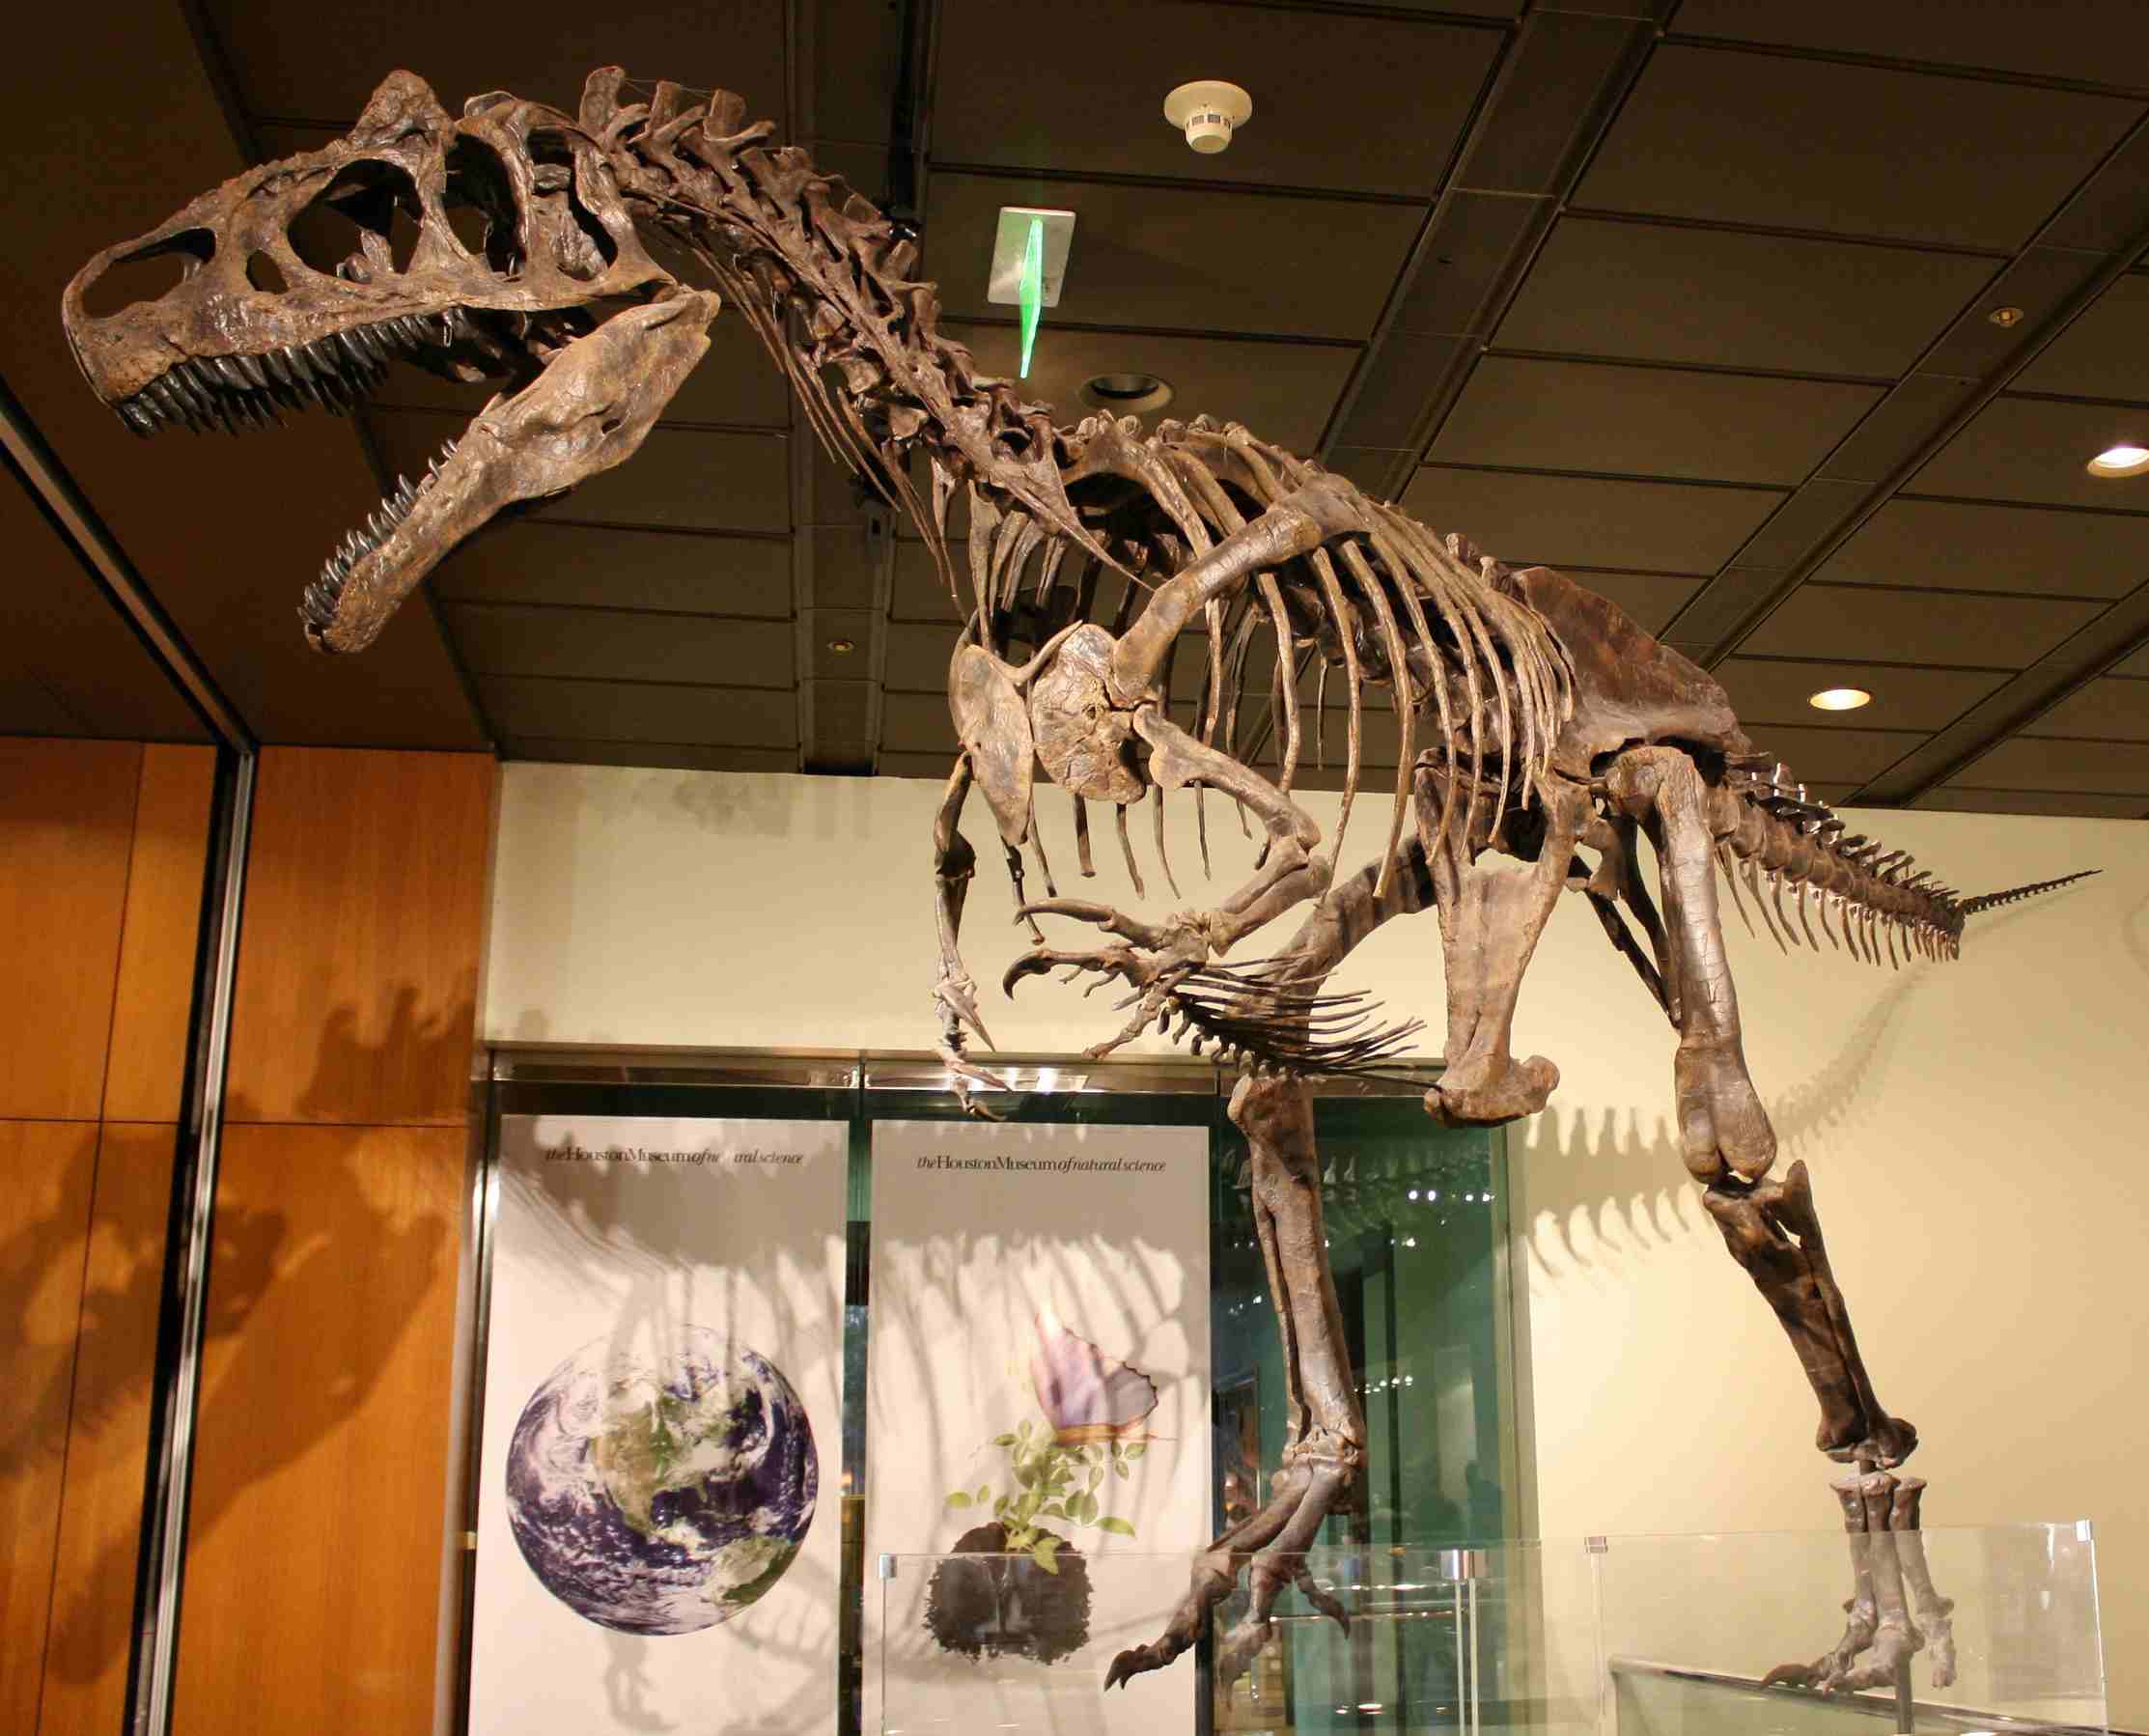 Allosaurus (Big Al II) This dinosaur lived during the Jurassic period approximately 150 million years ago.